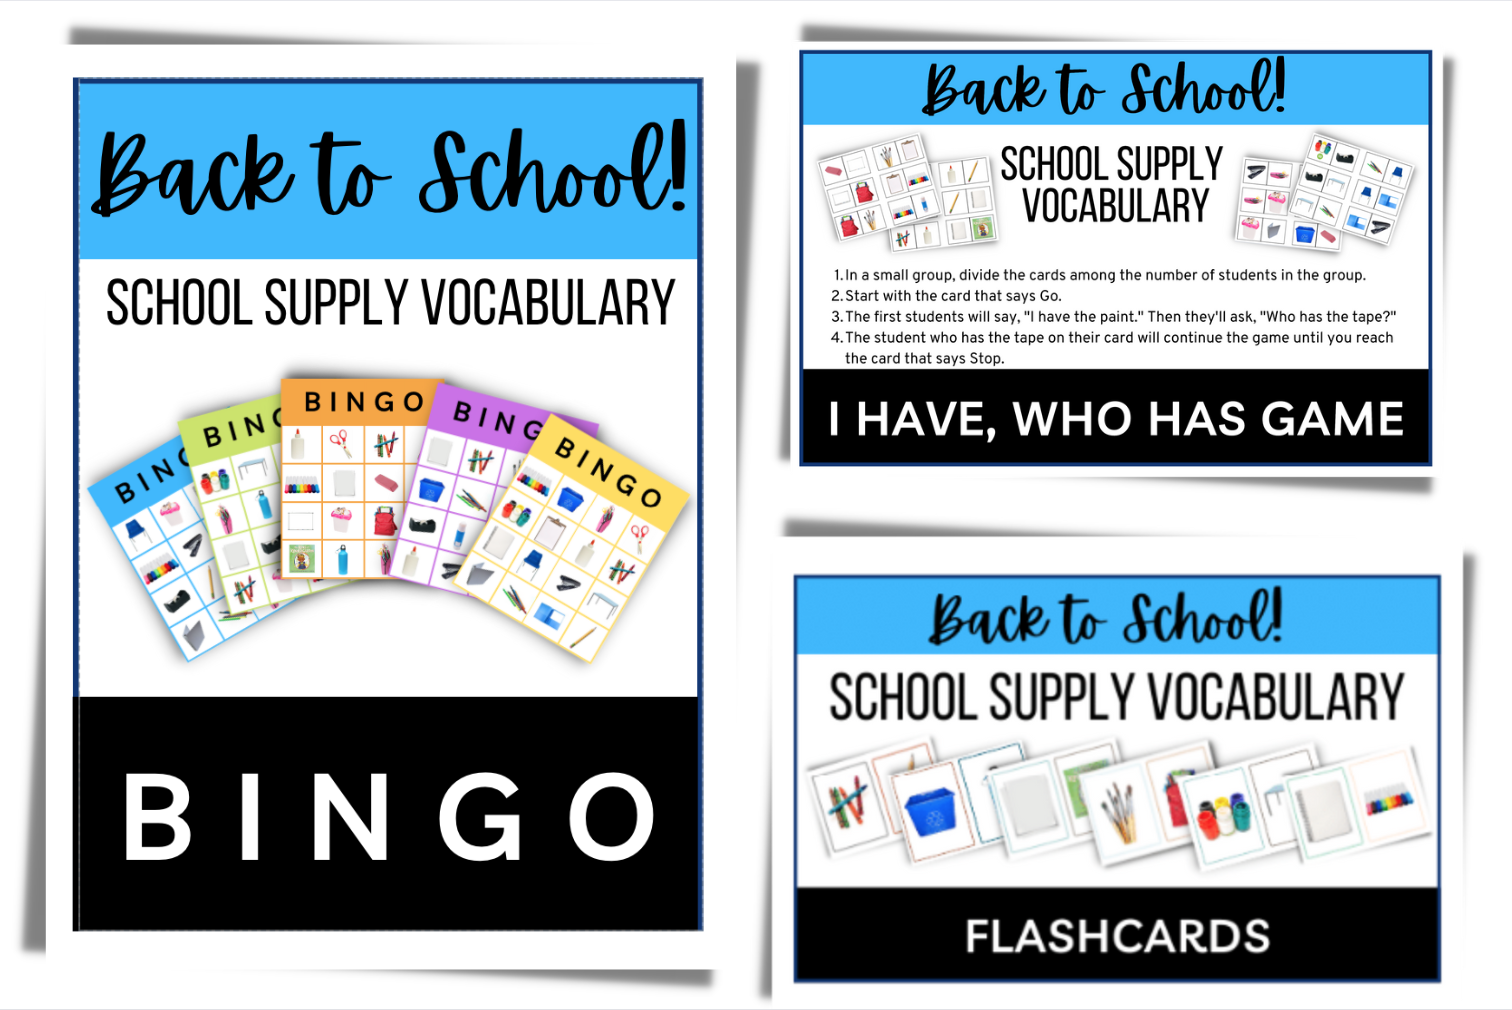 Editable Review Game-Great for Back to School! by Miss Hunt's Creations